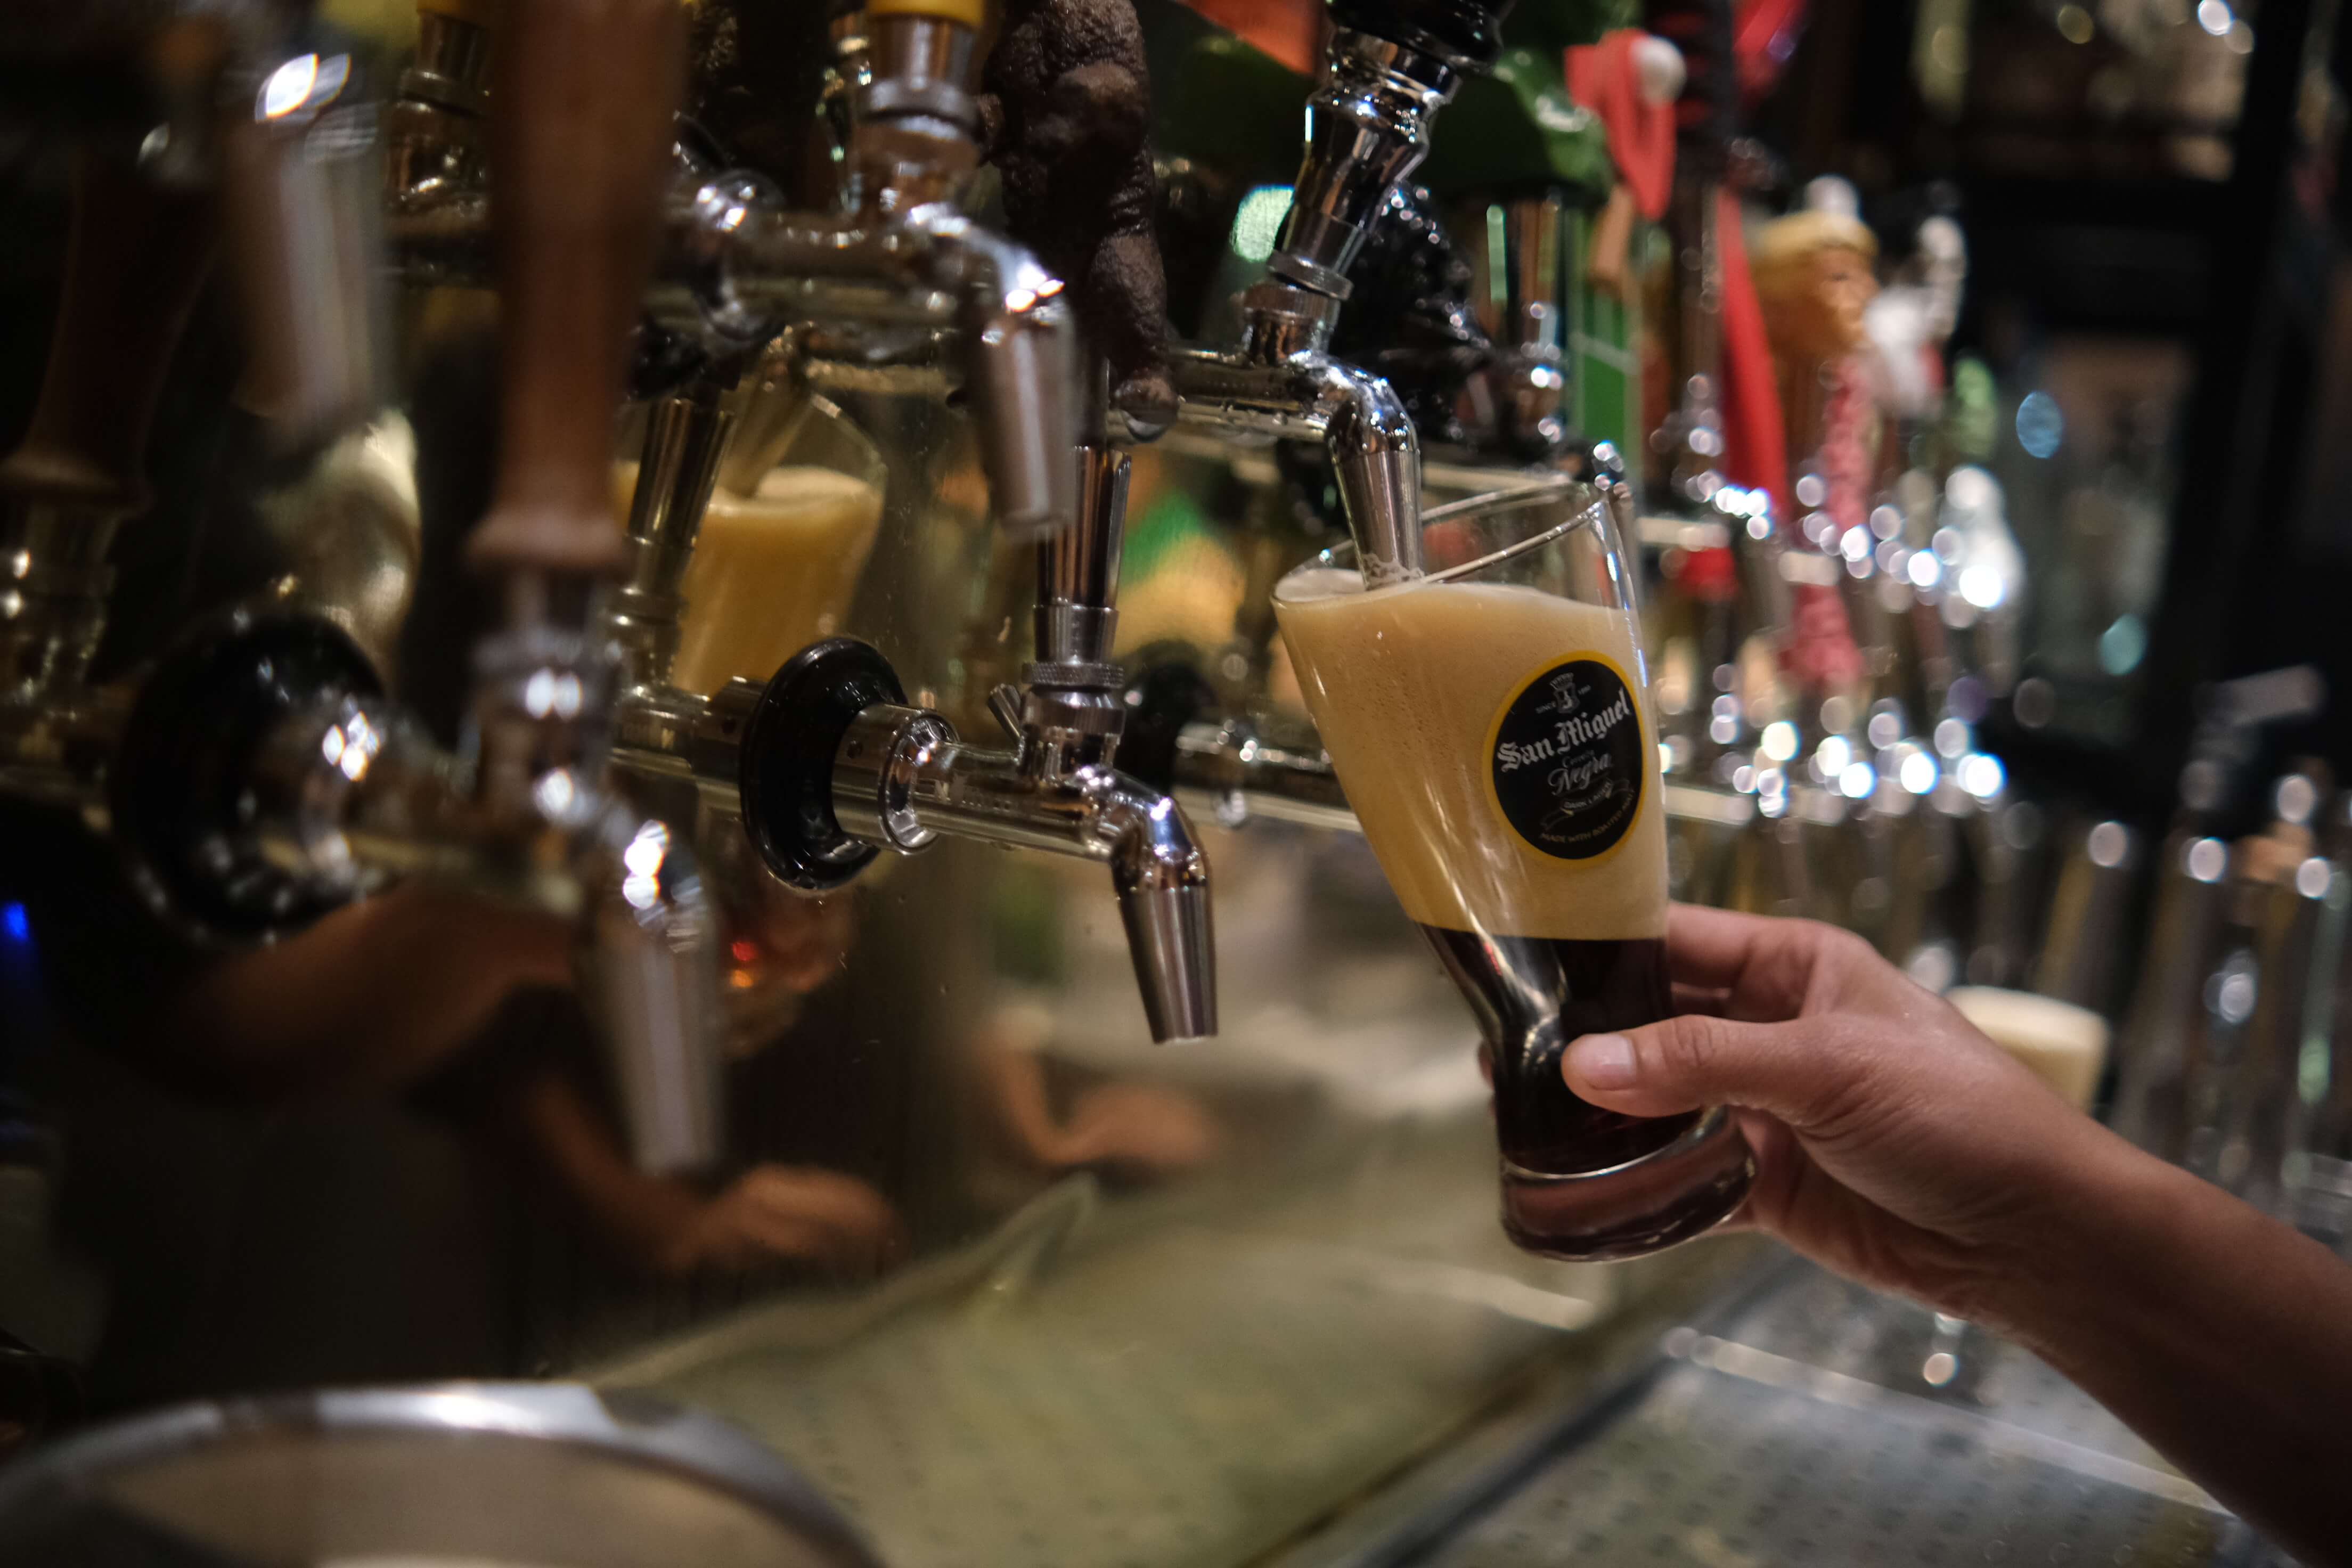 san-miguel-launches-new-draft-beers-during-tilt-on-tap-tour